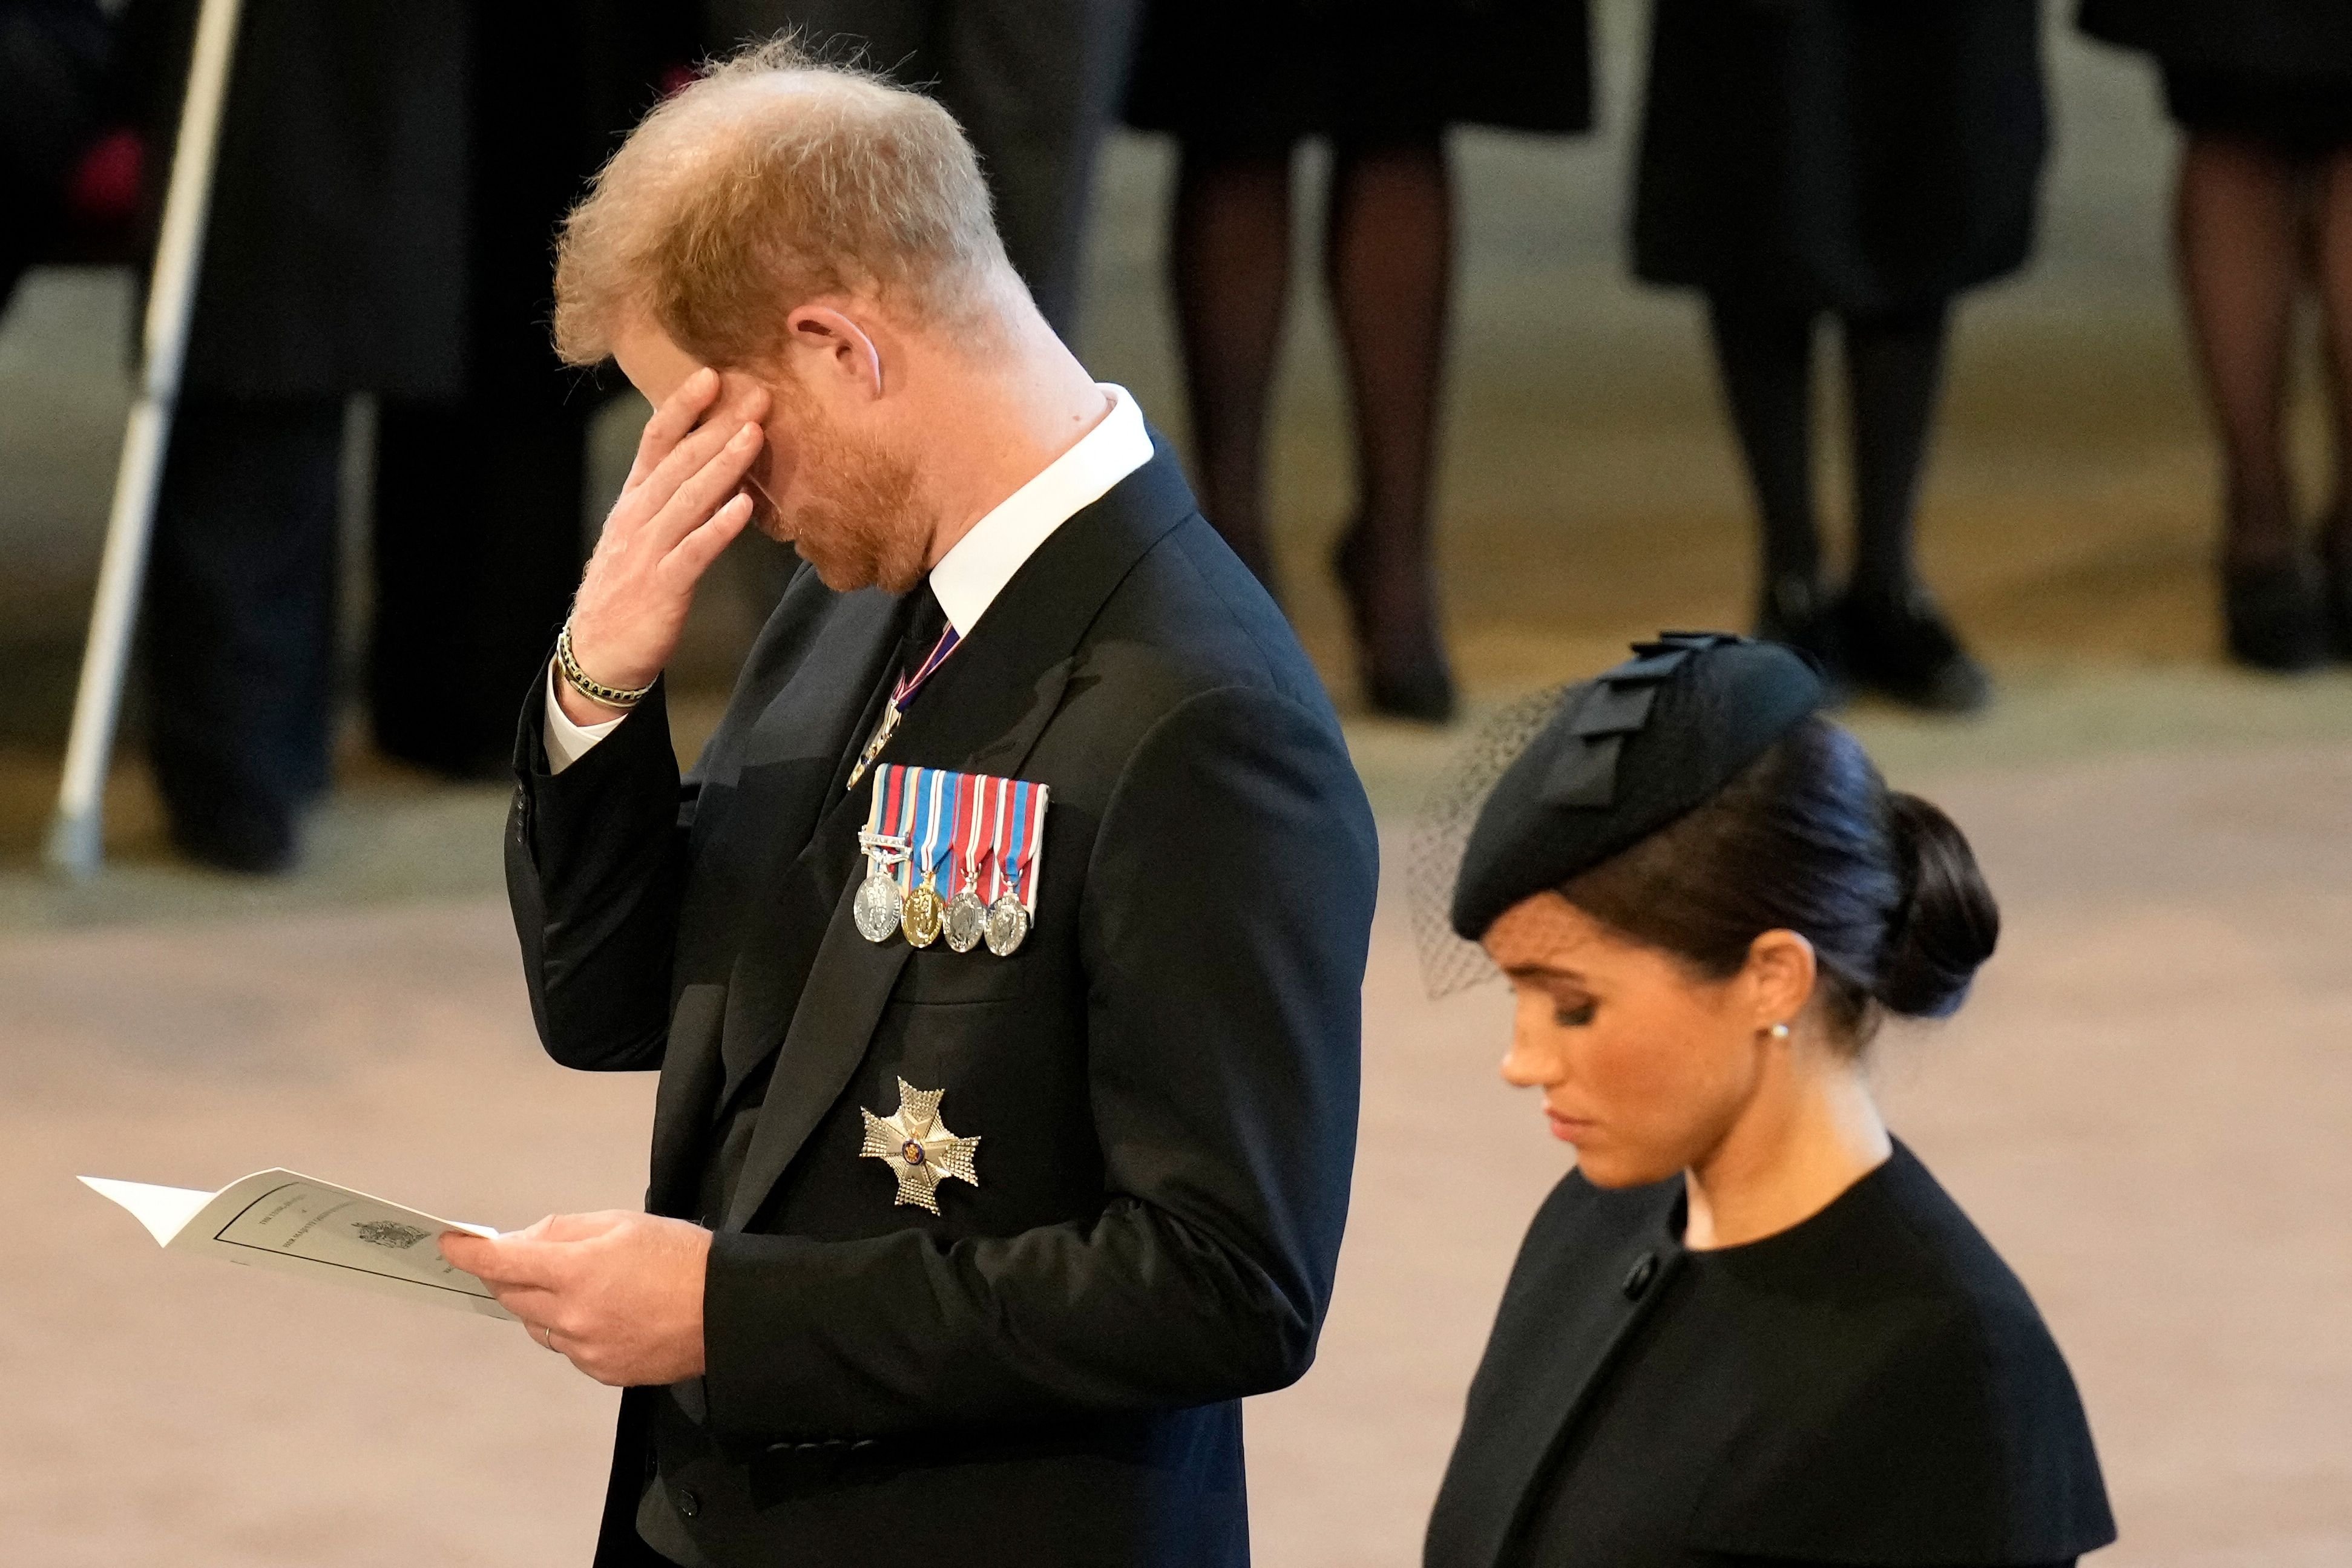 Prince Harry wipes away a tear as he pays his respects inside Westminster Hall at the Palace of Westminster, where the coffin of Queen Elizabeth II will Lie in State on a Catafalque, in London on September 14, 2022 | Source: Getty Images